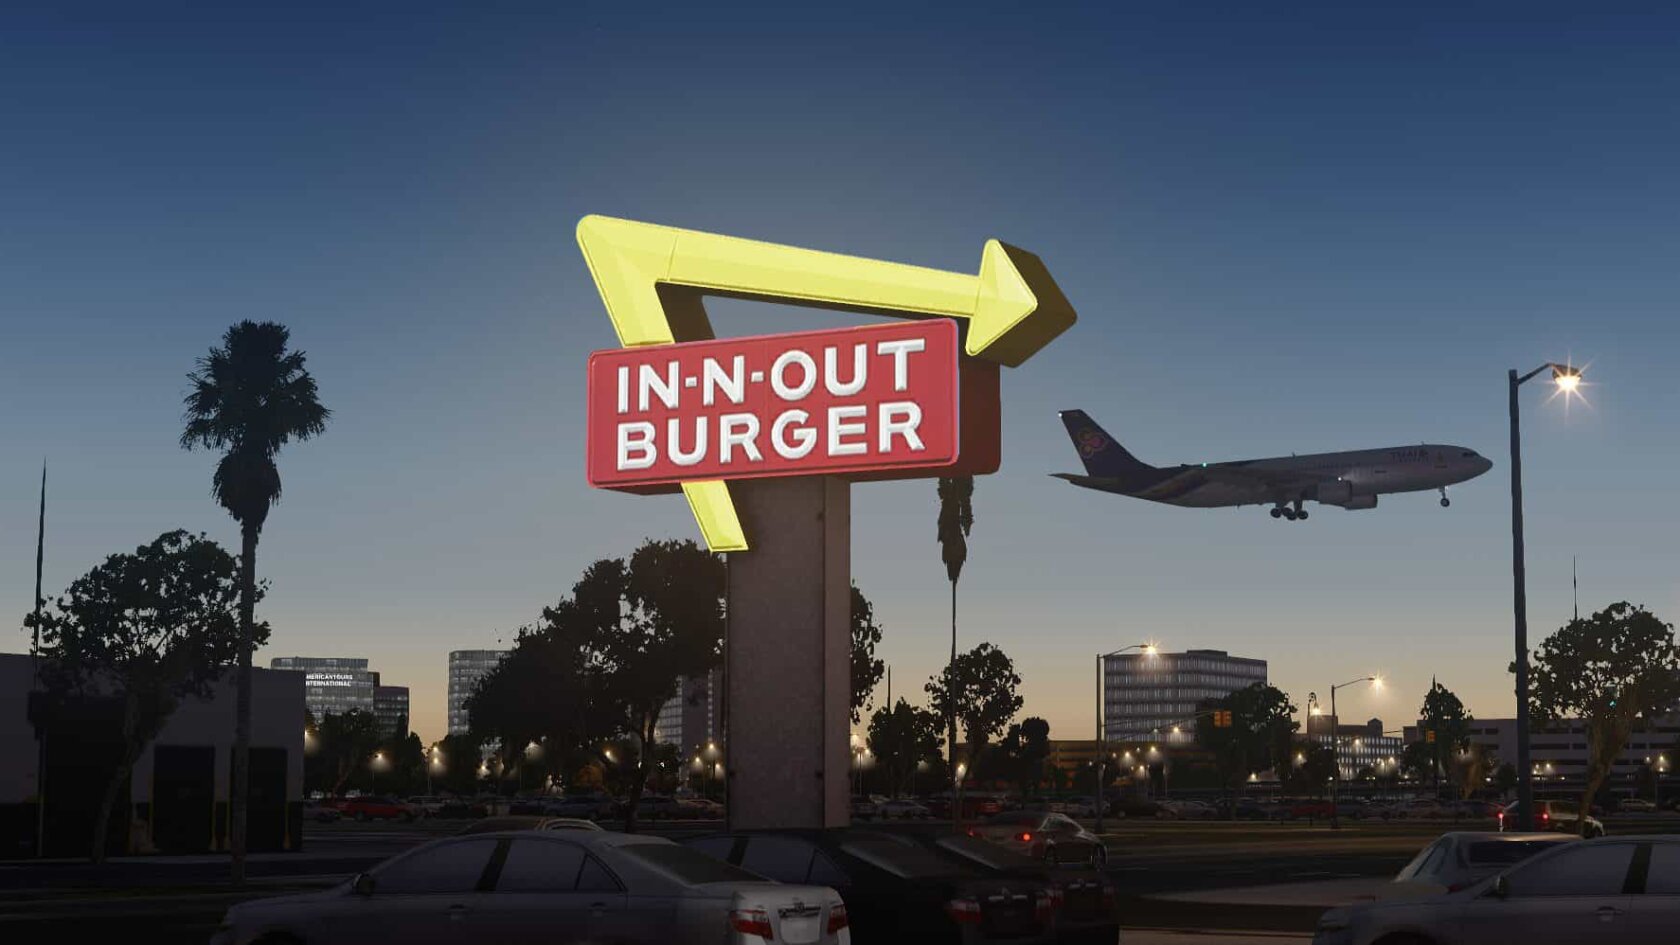 LAX In n out Burger in Flight Simulator